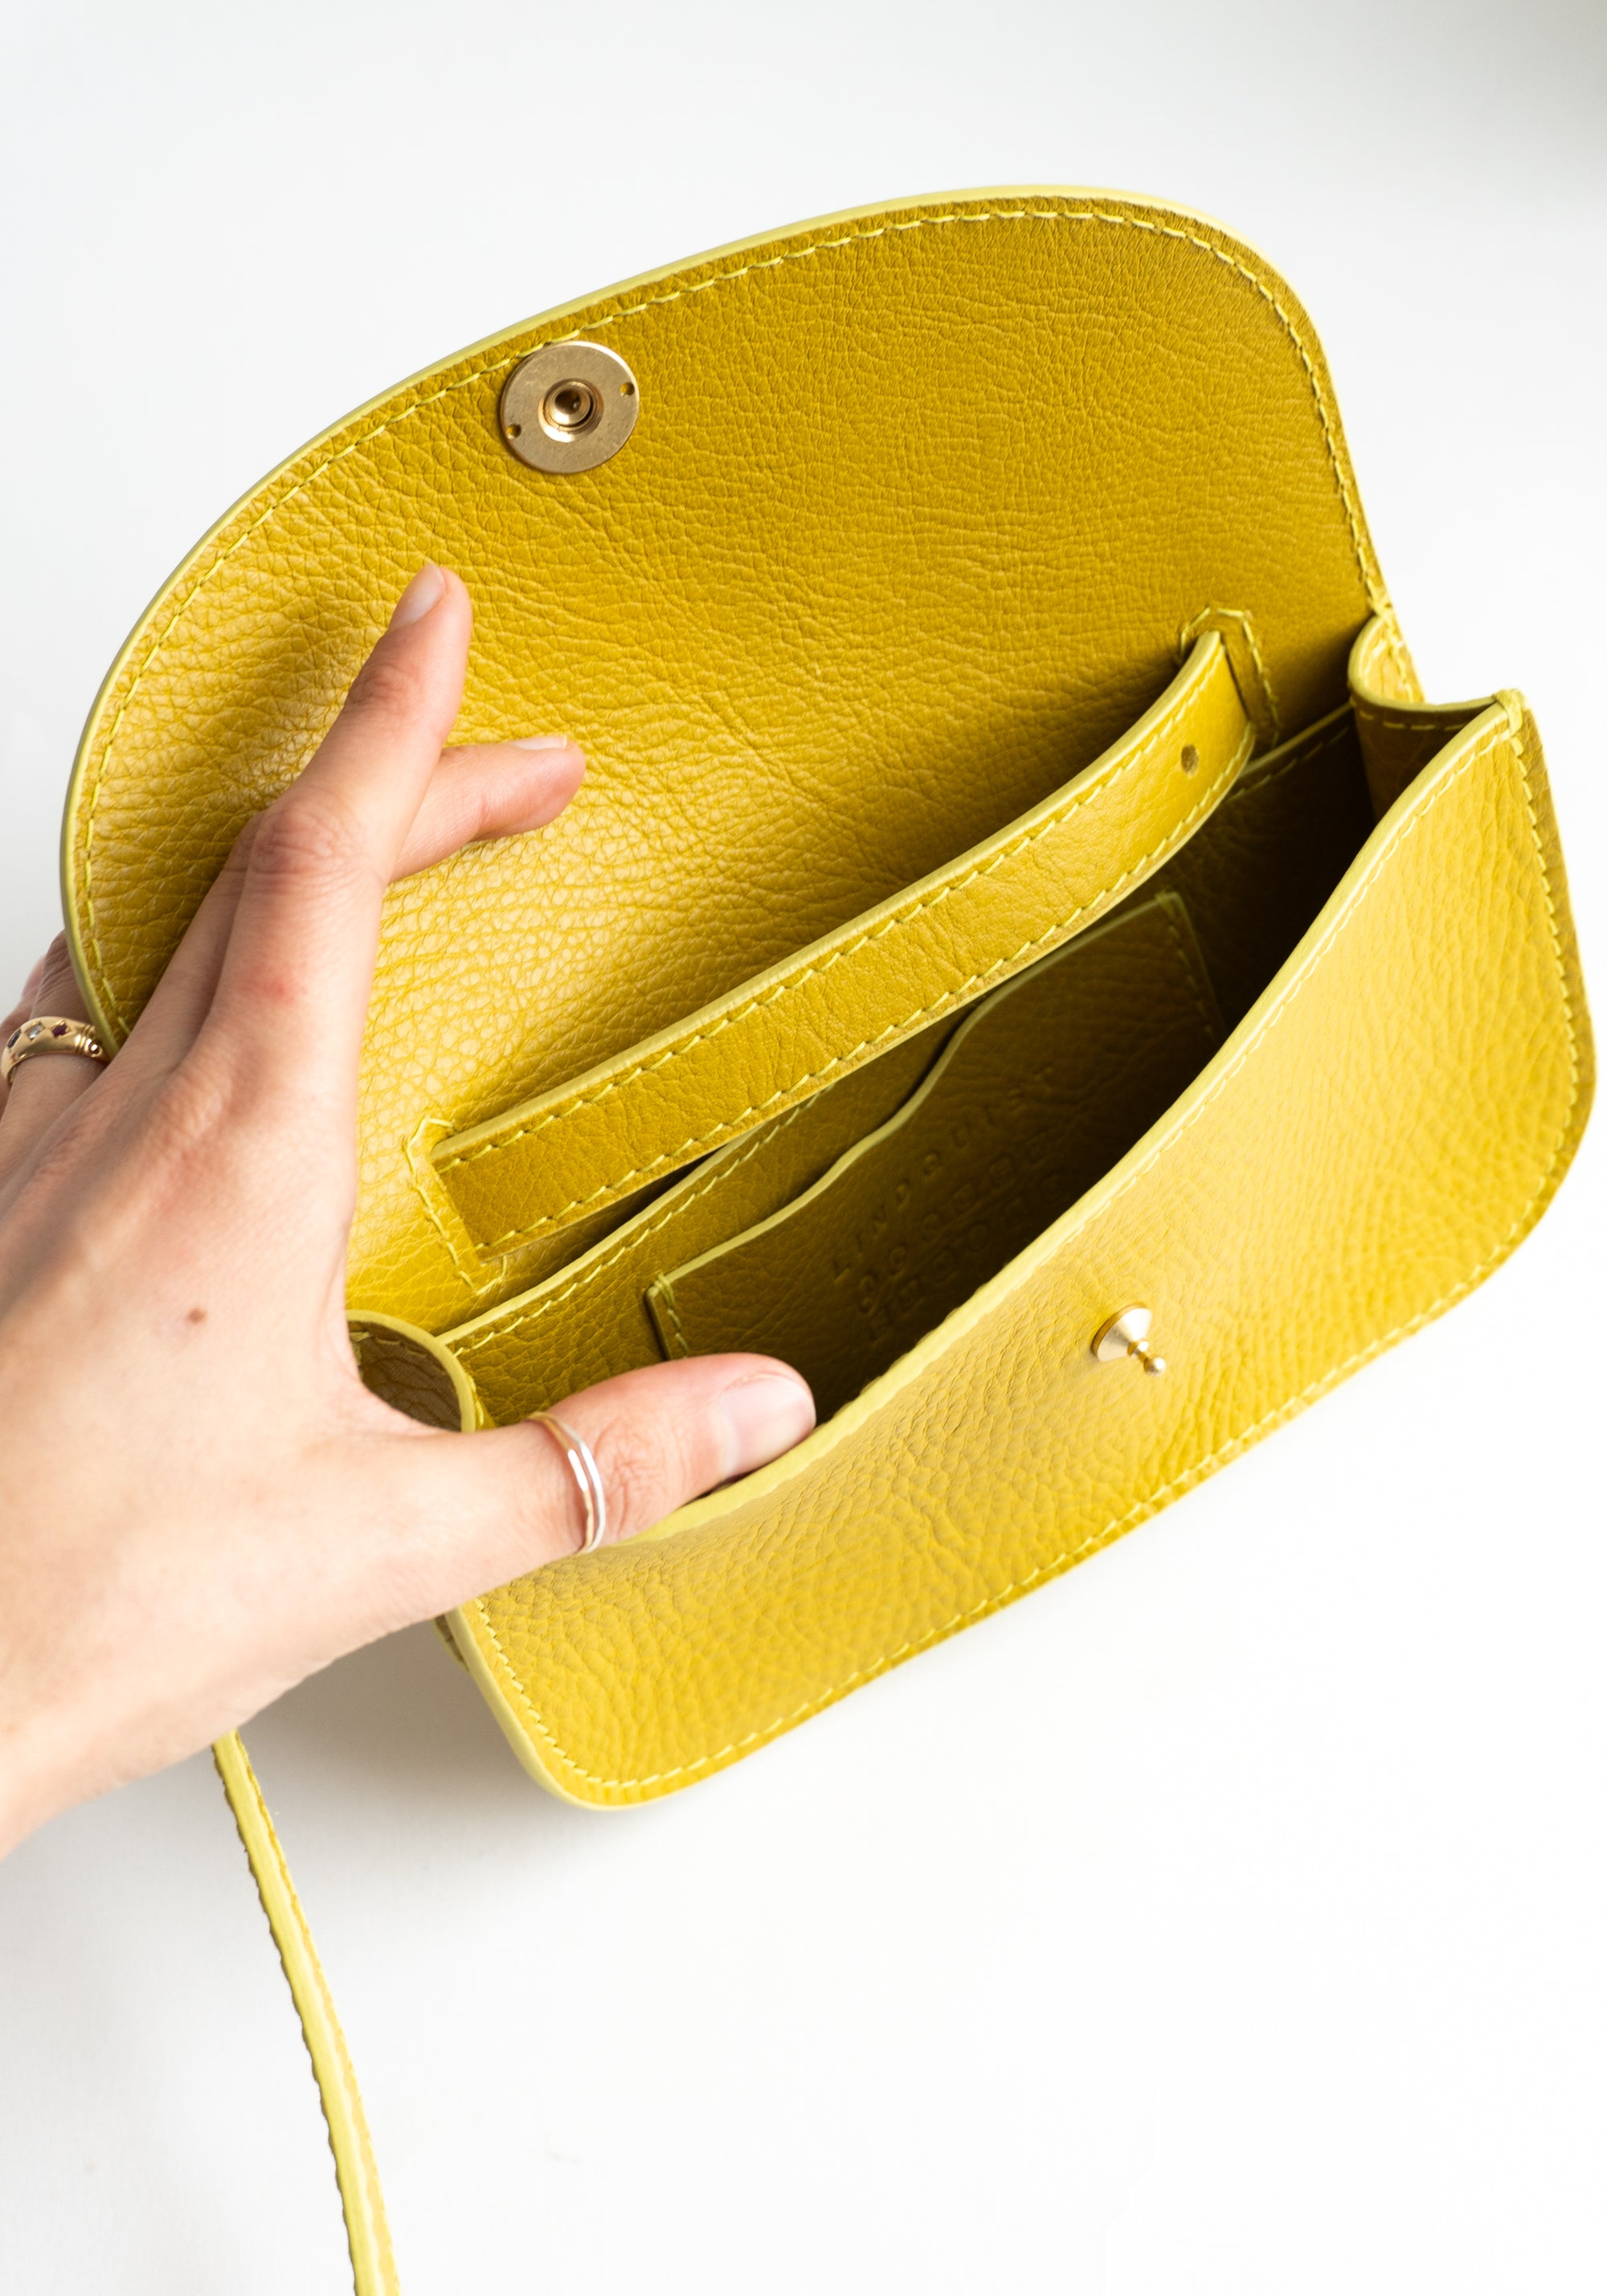 Lindquist Faba Bag in Chartreuse